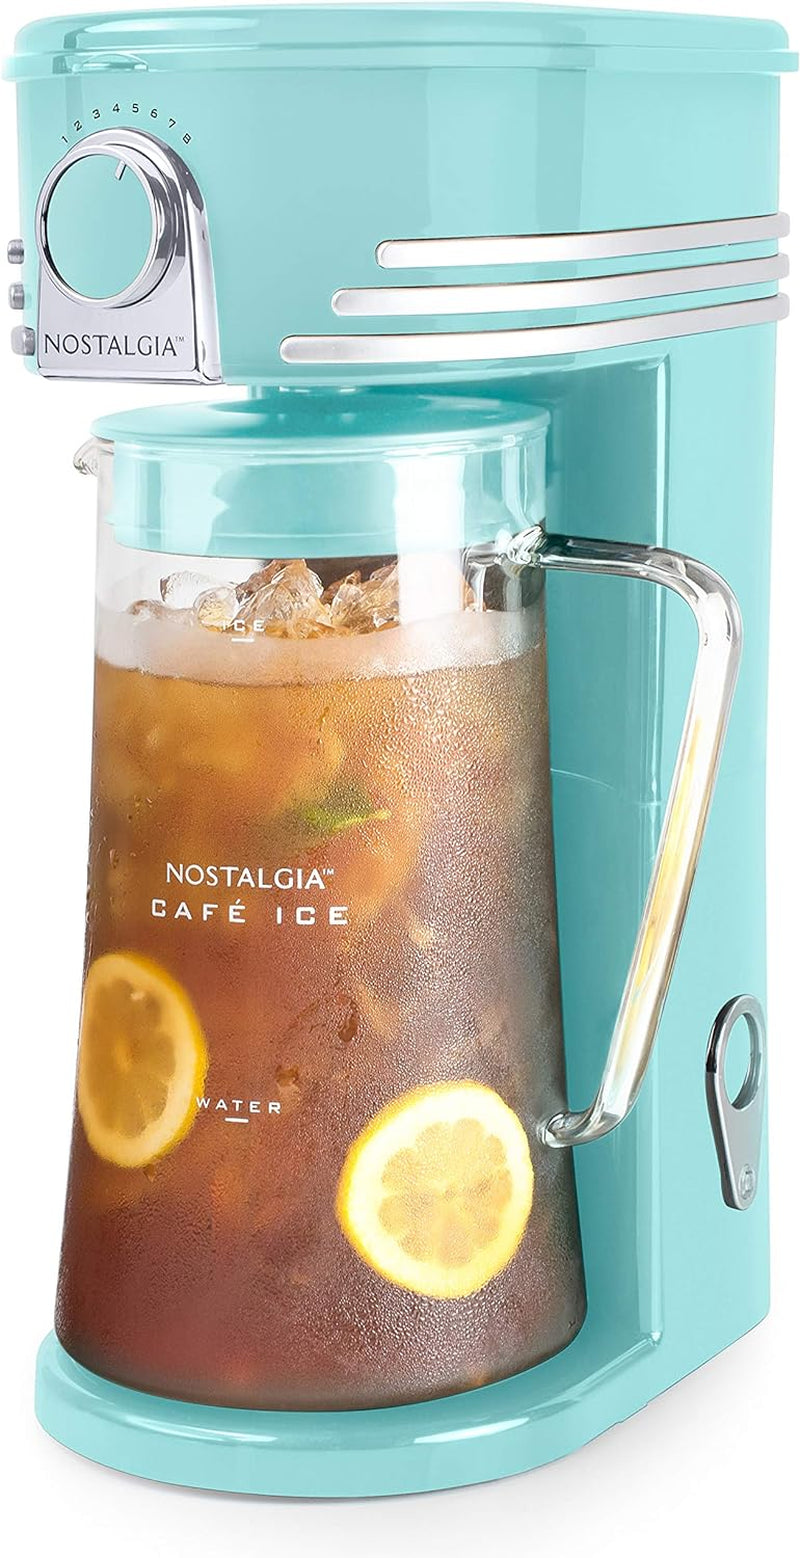 Nostalgia 3-Quart Iced Tea & Coffee Brewing System With Double-Insulated Pitcher, Strength Selector & Infuser Chamber, Also Perfect For Lattes, Lemonade, Flavored Water, Black